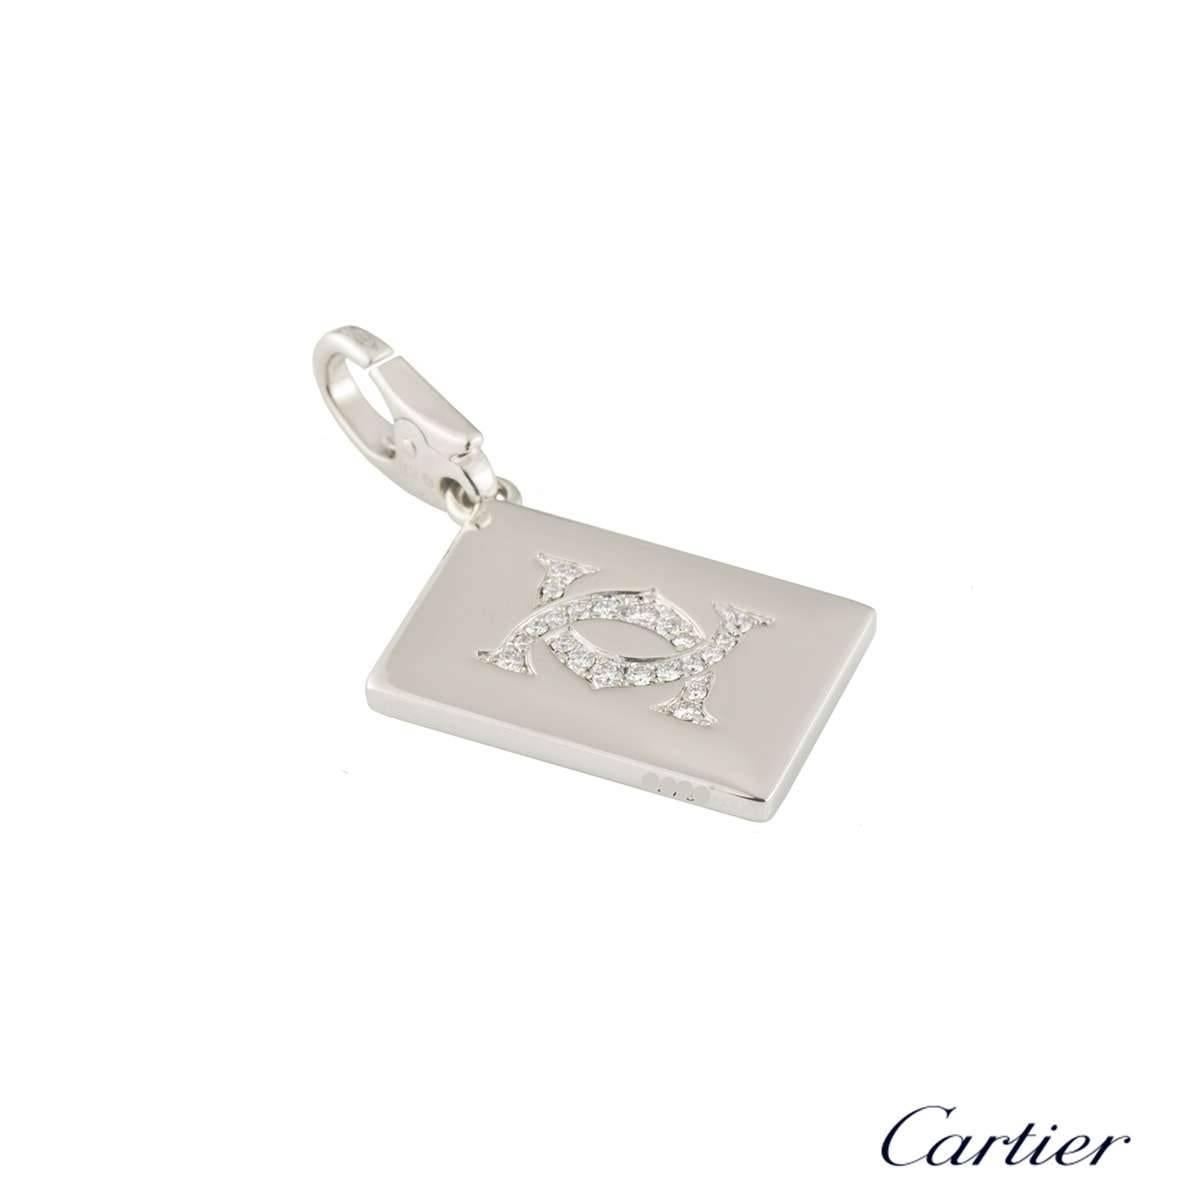 A unique 18k white gold playing card by Cartier. The front of the charm features a Joker playing card; set with diamonds, rubies and onyx. The reverse is encrusted with a diamond double C motif. The diamonds total approximately 0.20ct and the rubies